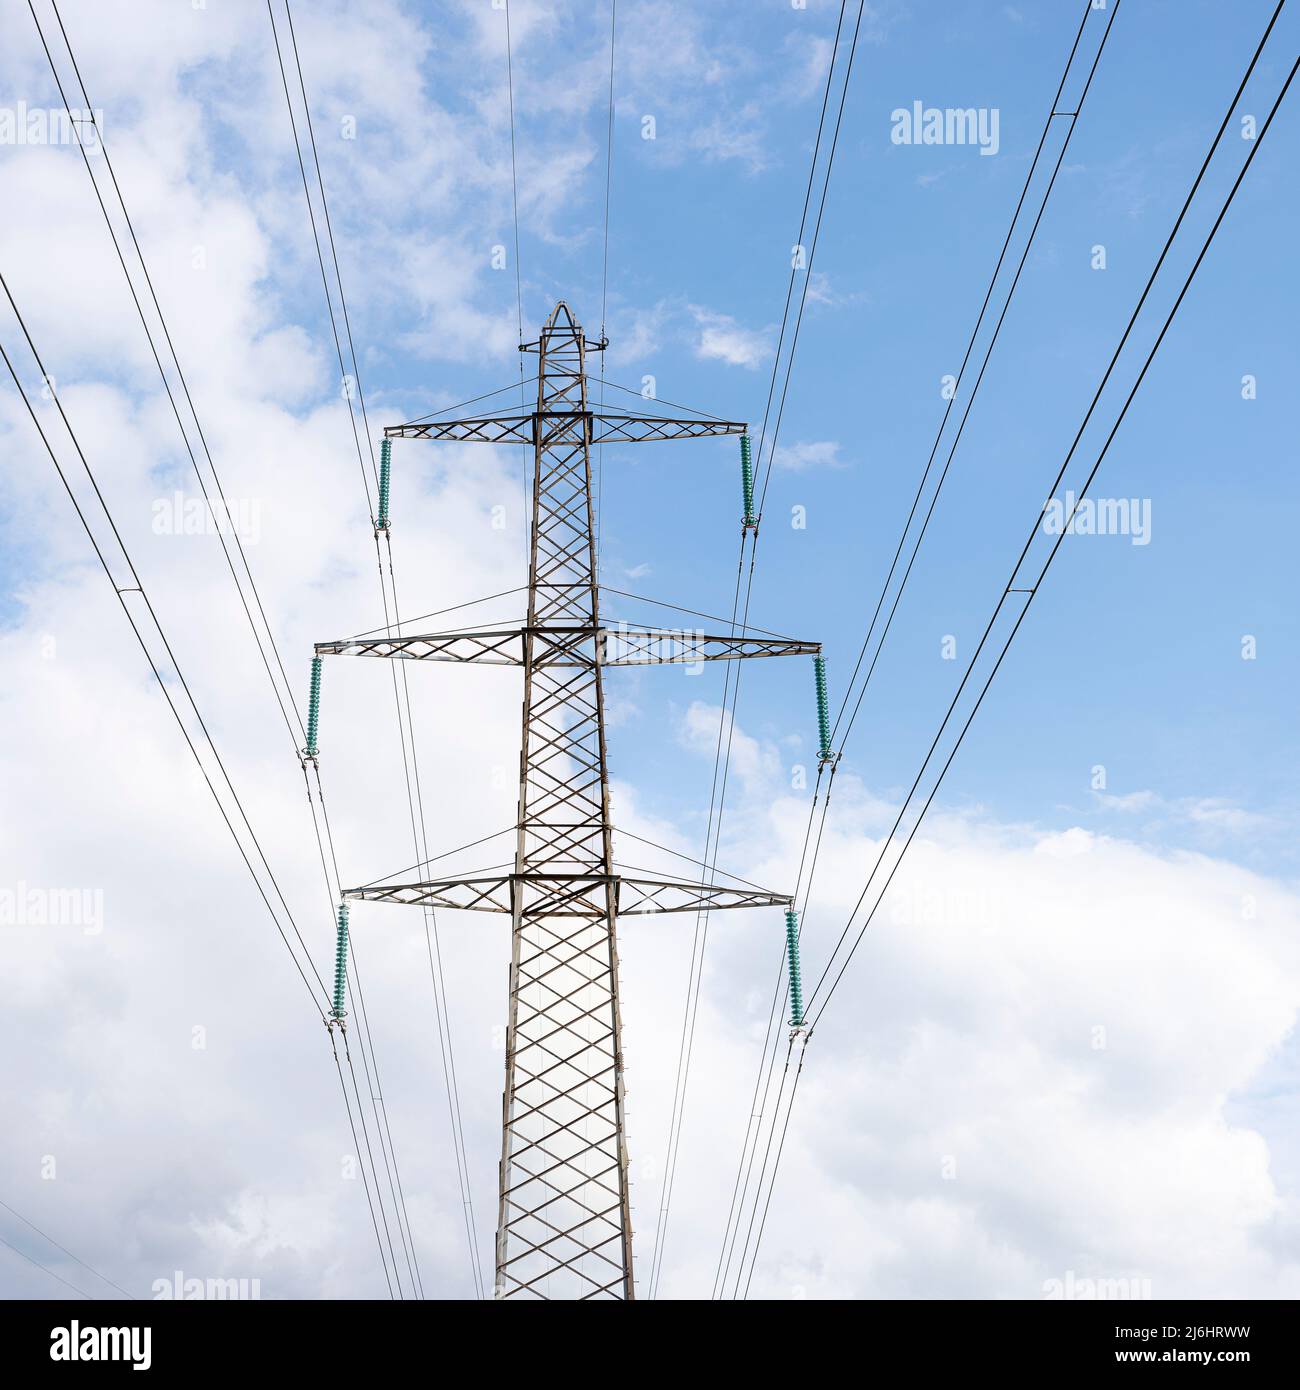 electricity transmission by a high voltage pole and wires aginst a blue sky, Denmark, May 1, 2022 Stock Photo